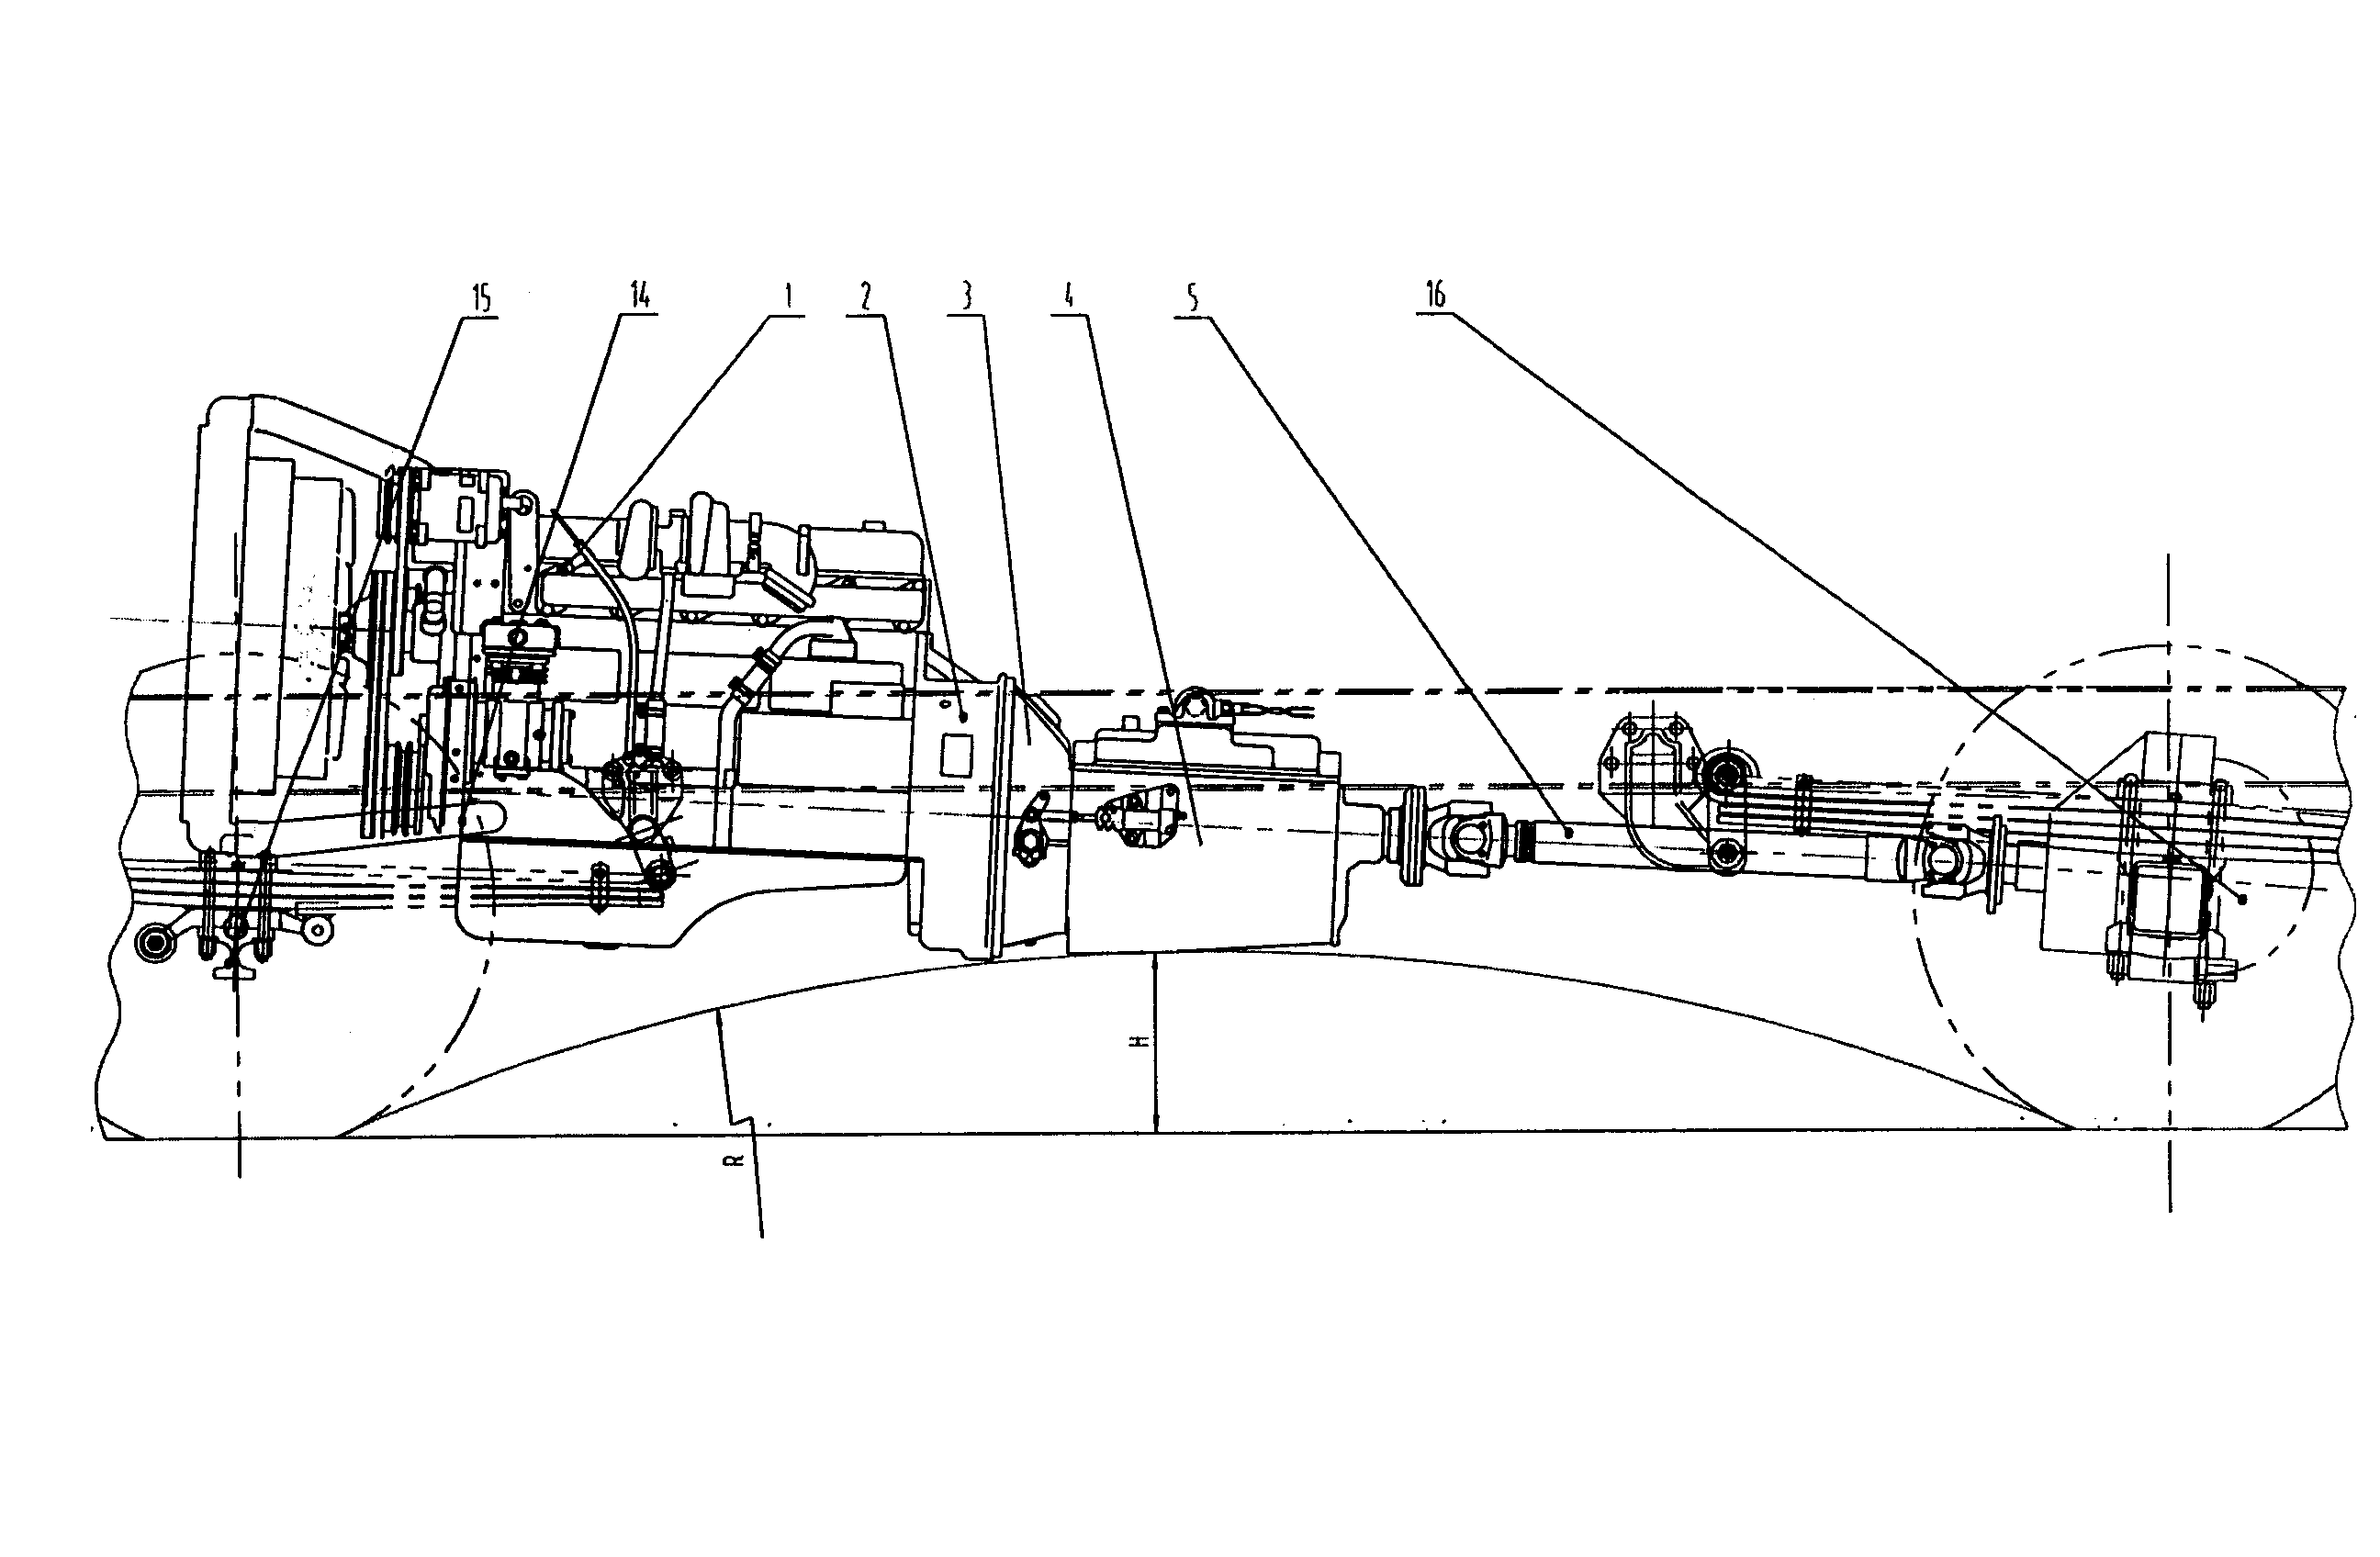 Arrangement for fixing engine with front air cooling of passenger car in middle position